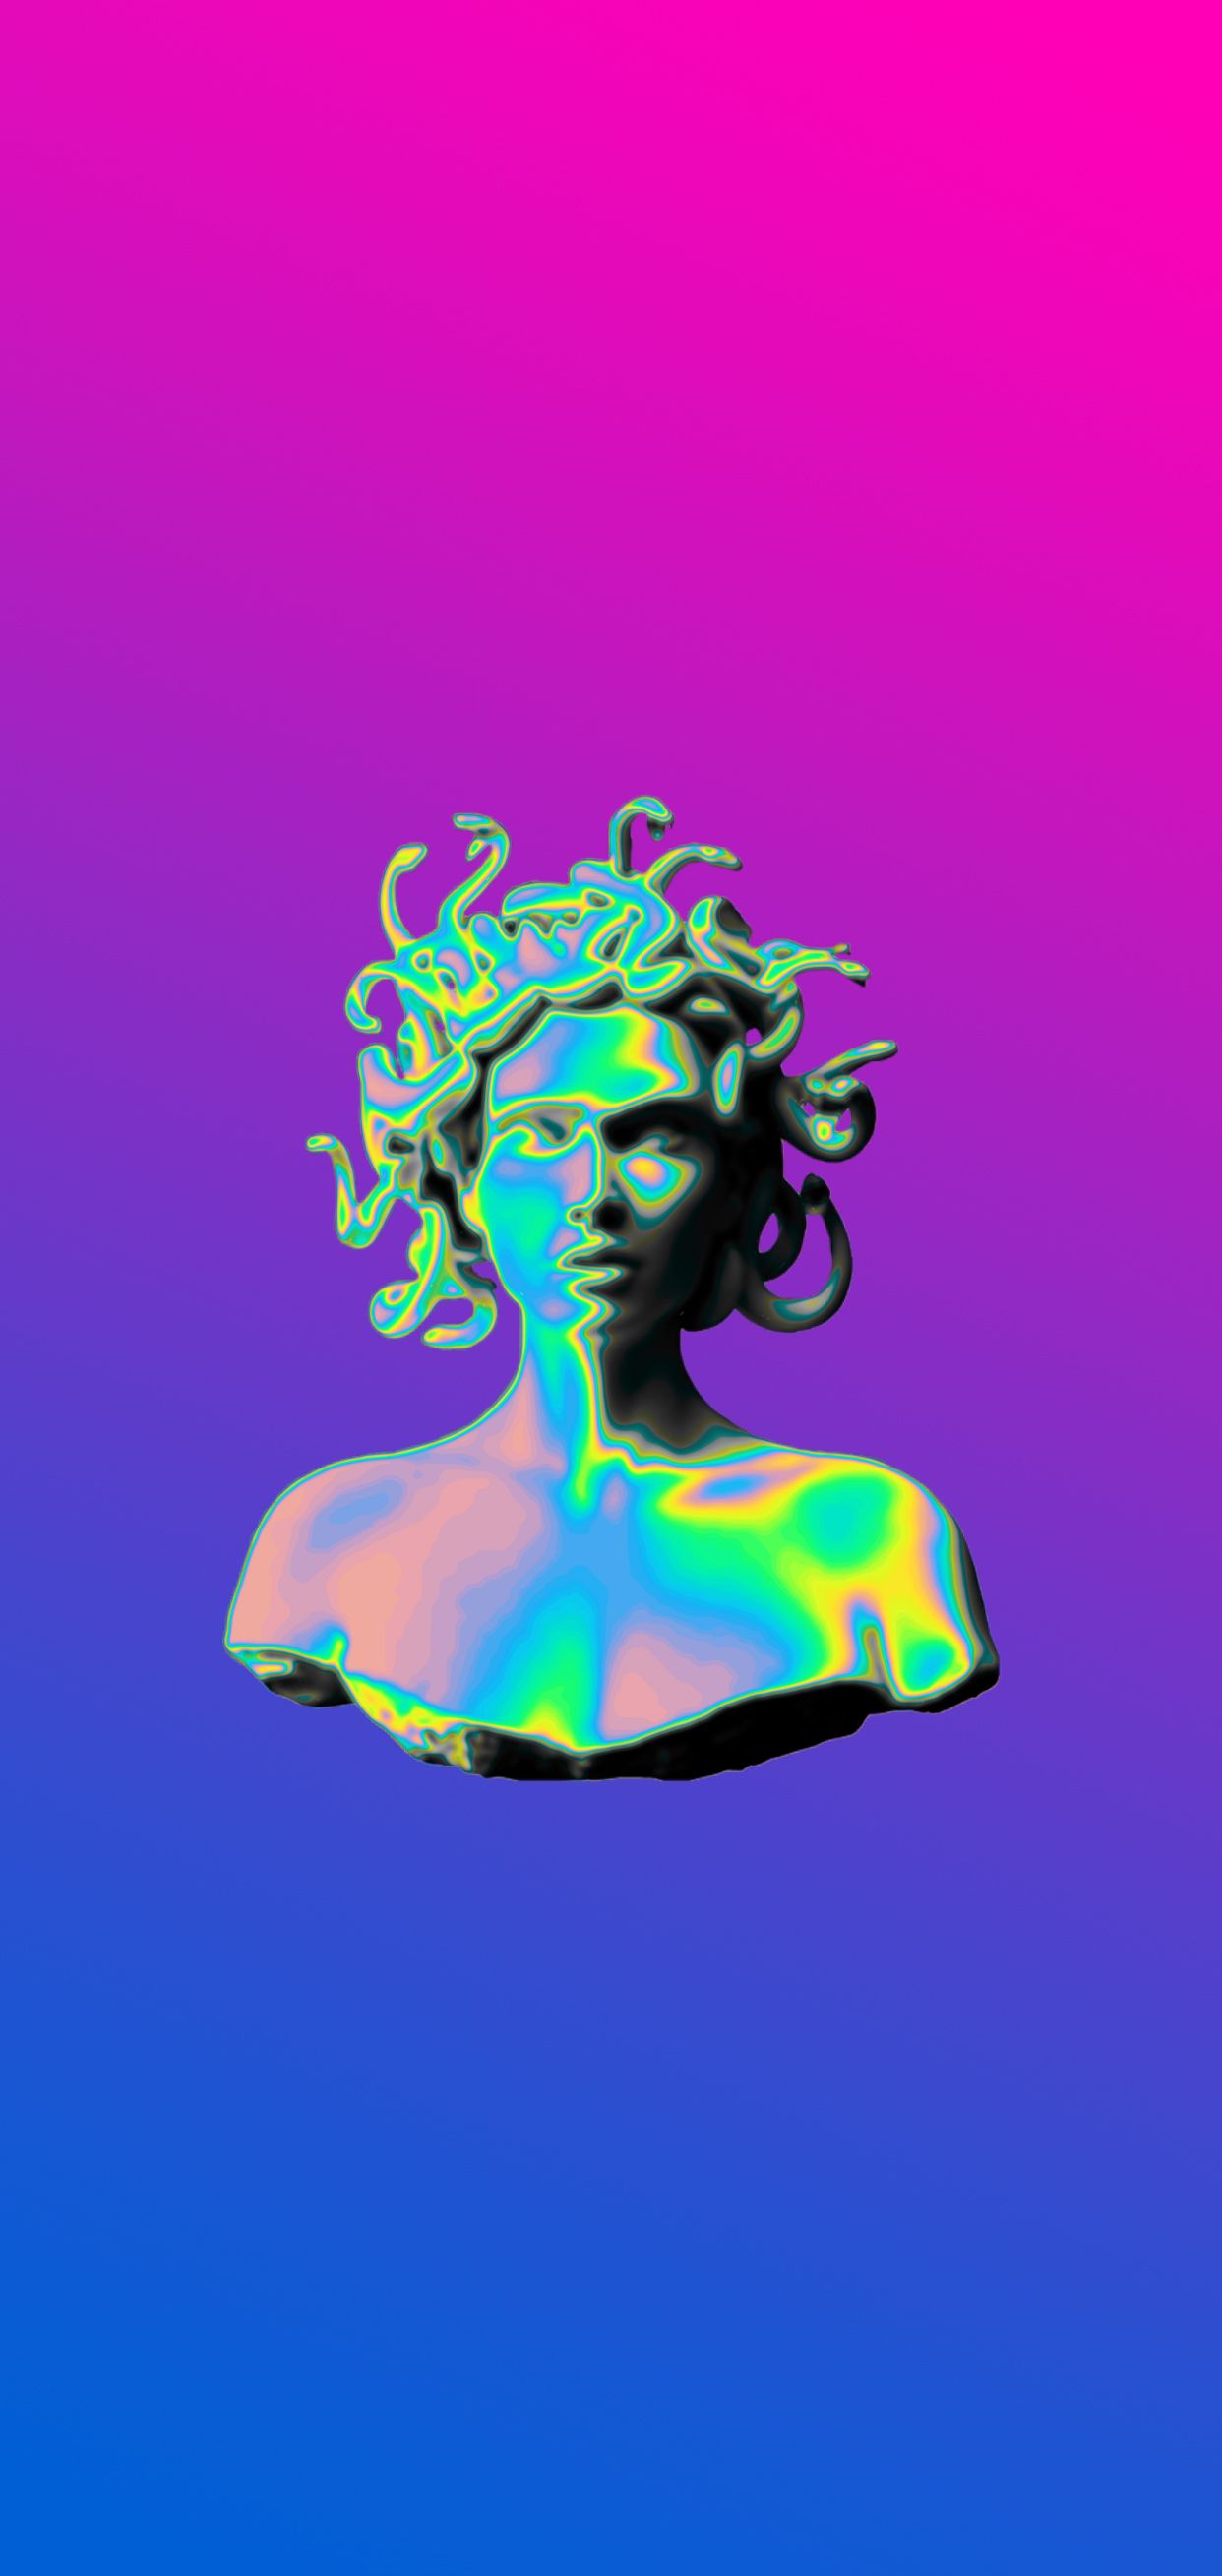 Holographic Medusa bust on a gradient background - IPhone, cool